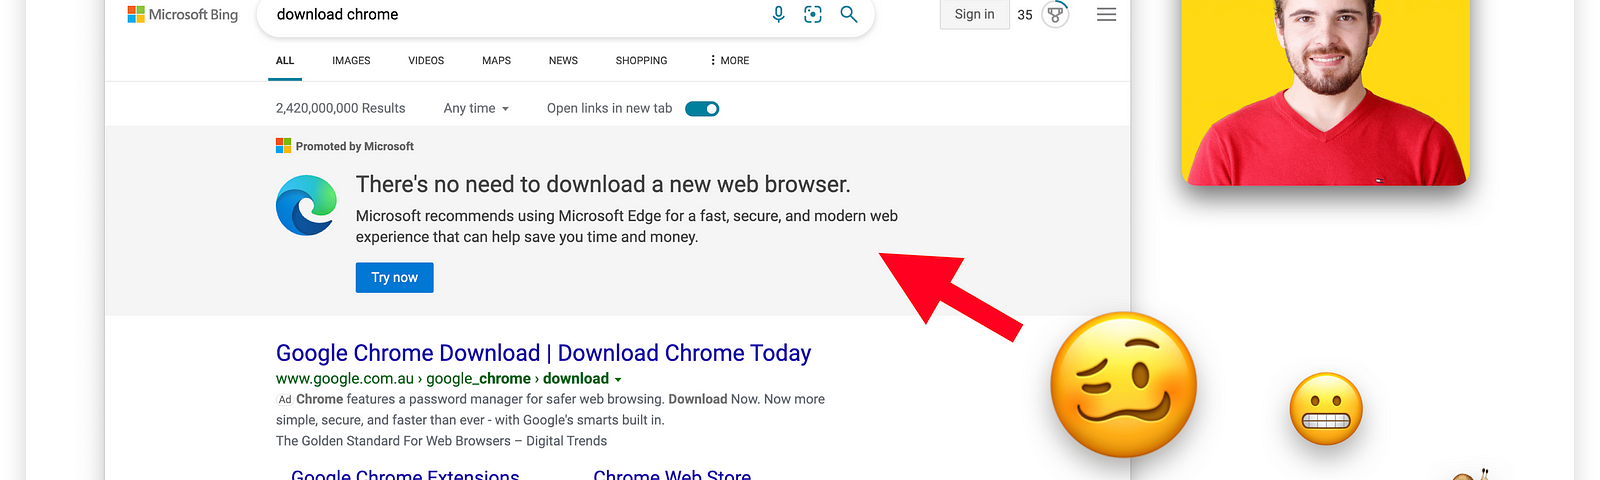 Microsoft’s Edge browser asks a user not to download another web browser.